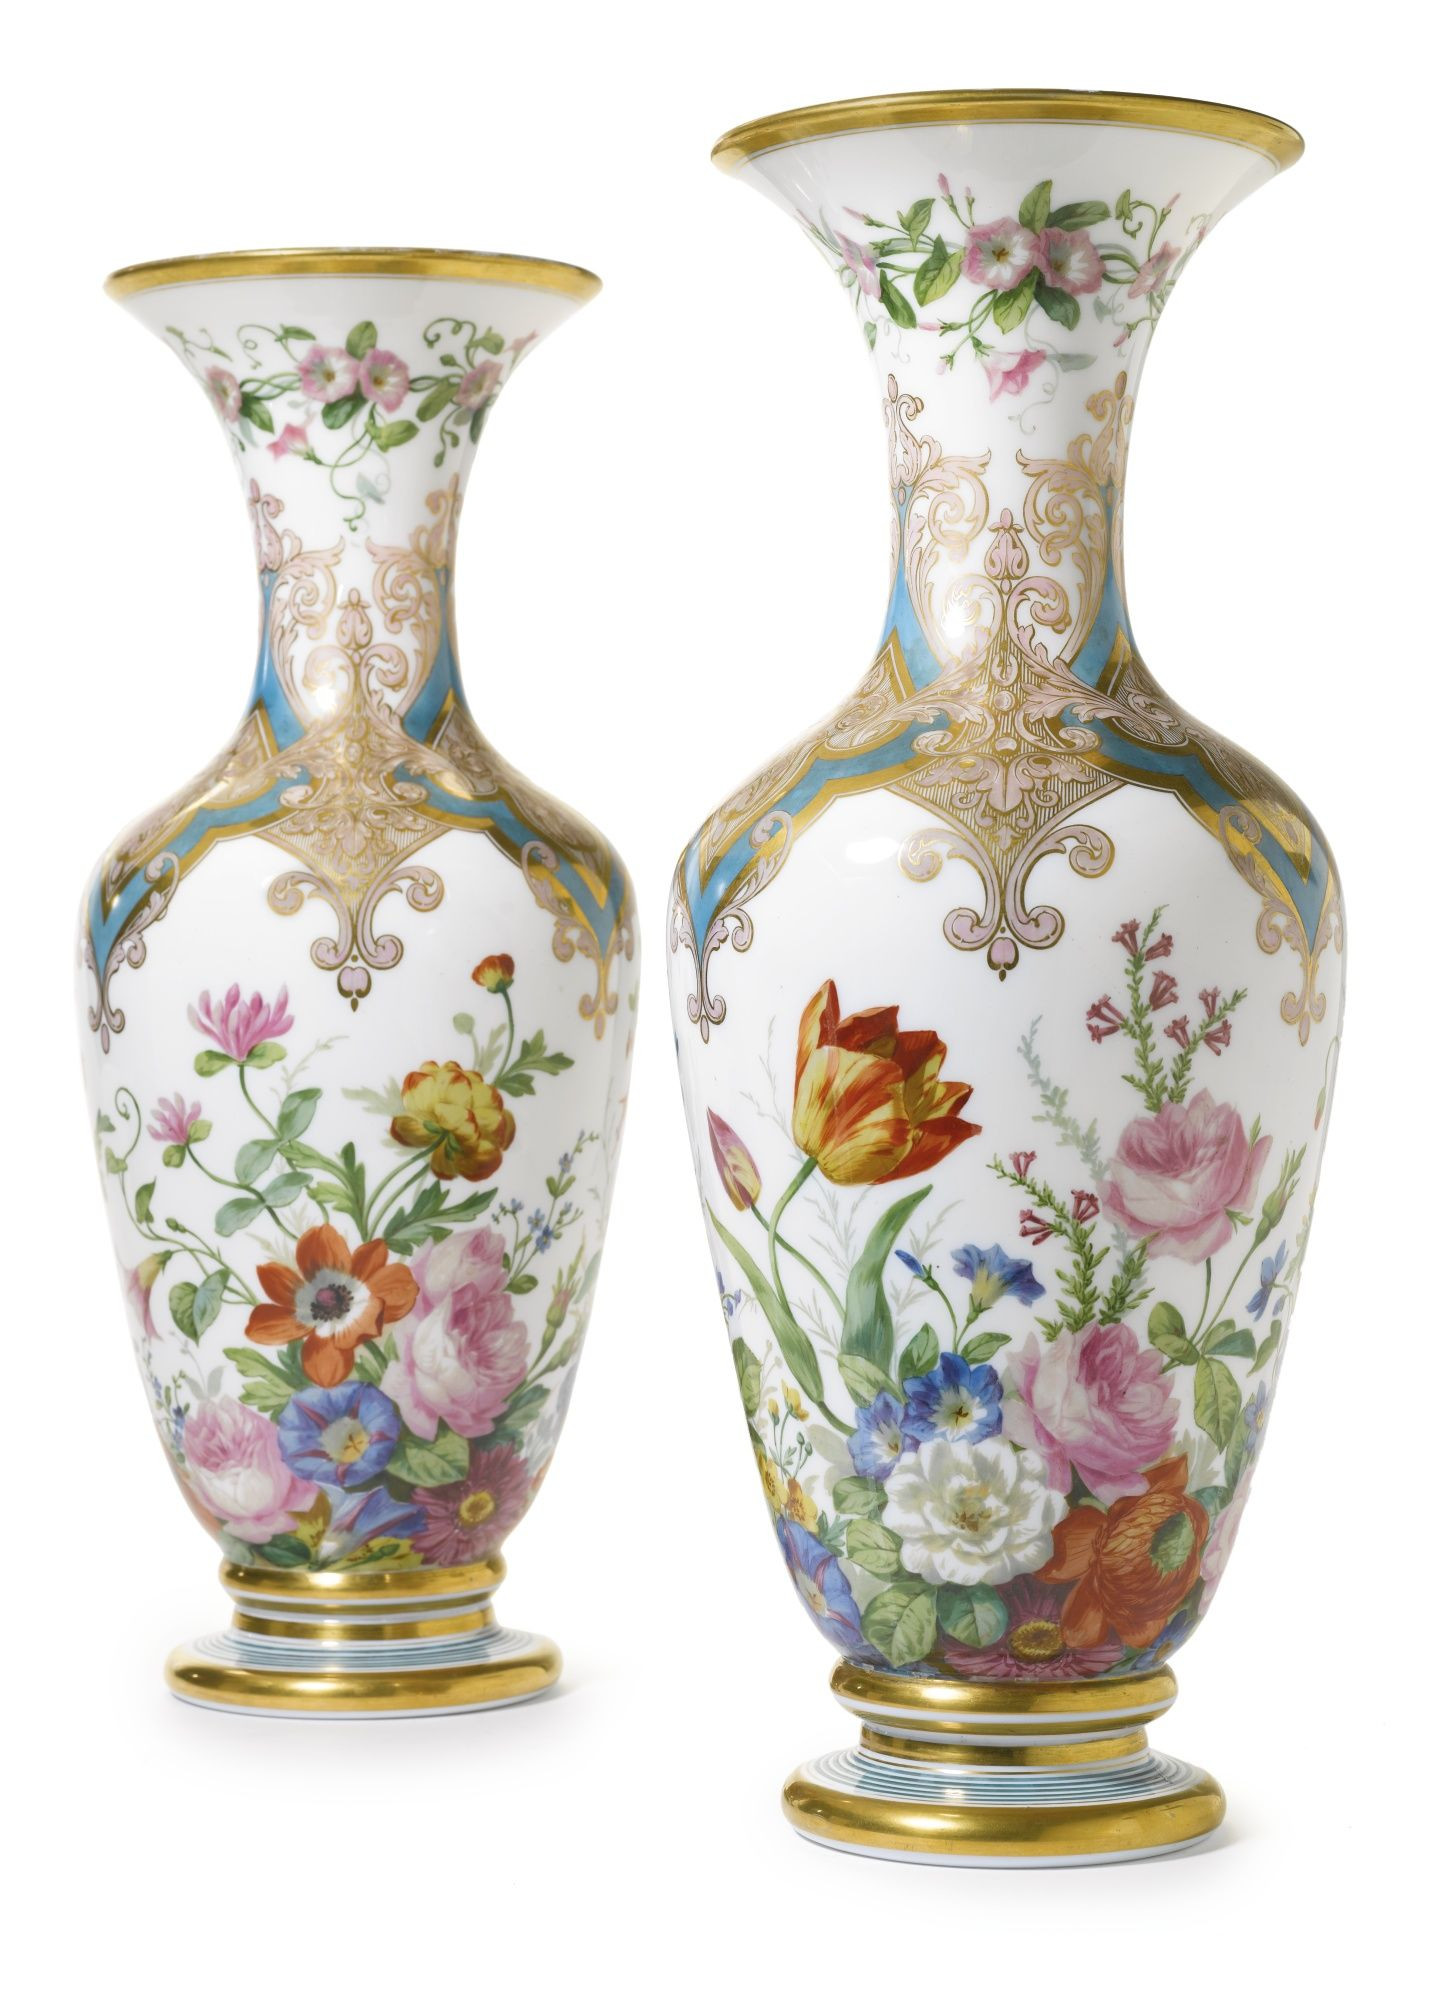 26 Famous Large White Vases for Sale 2024 free download large white vases for sale of a pair of french white opaline glass vasescirca 1860 lot with a pair of french white opaline glass vasescirca 1860 lot sothebys